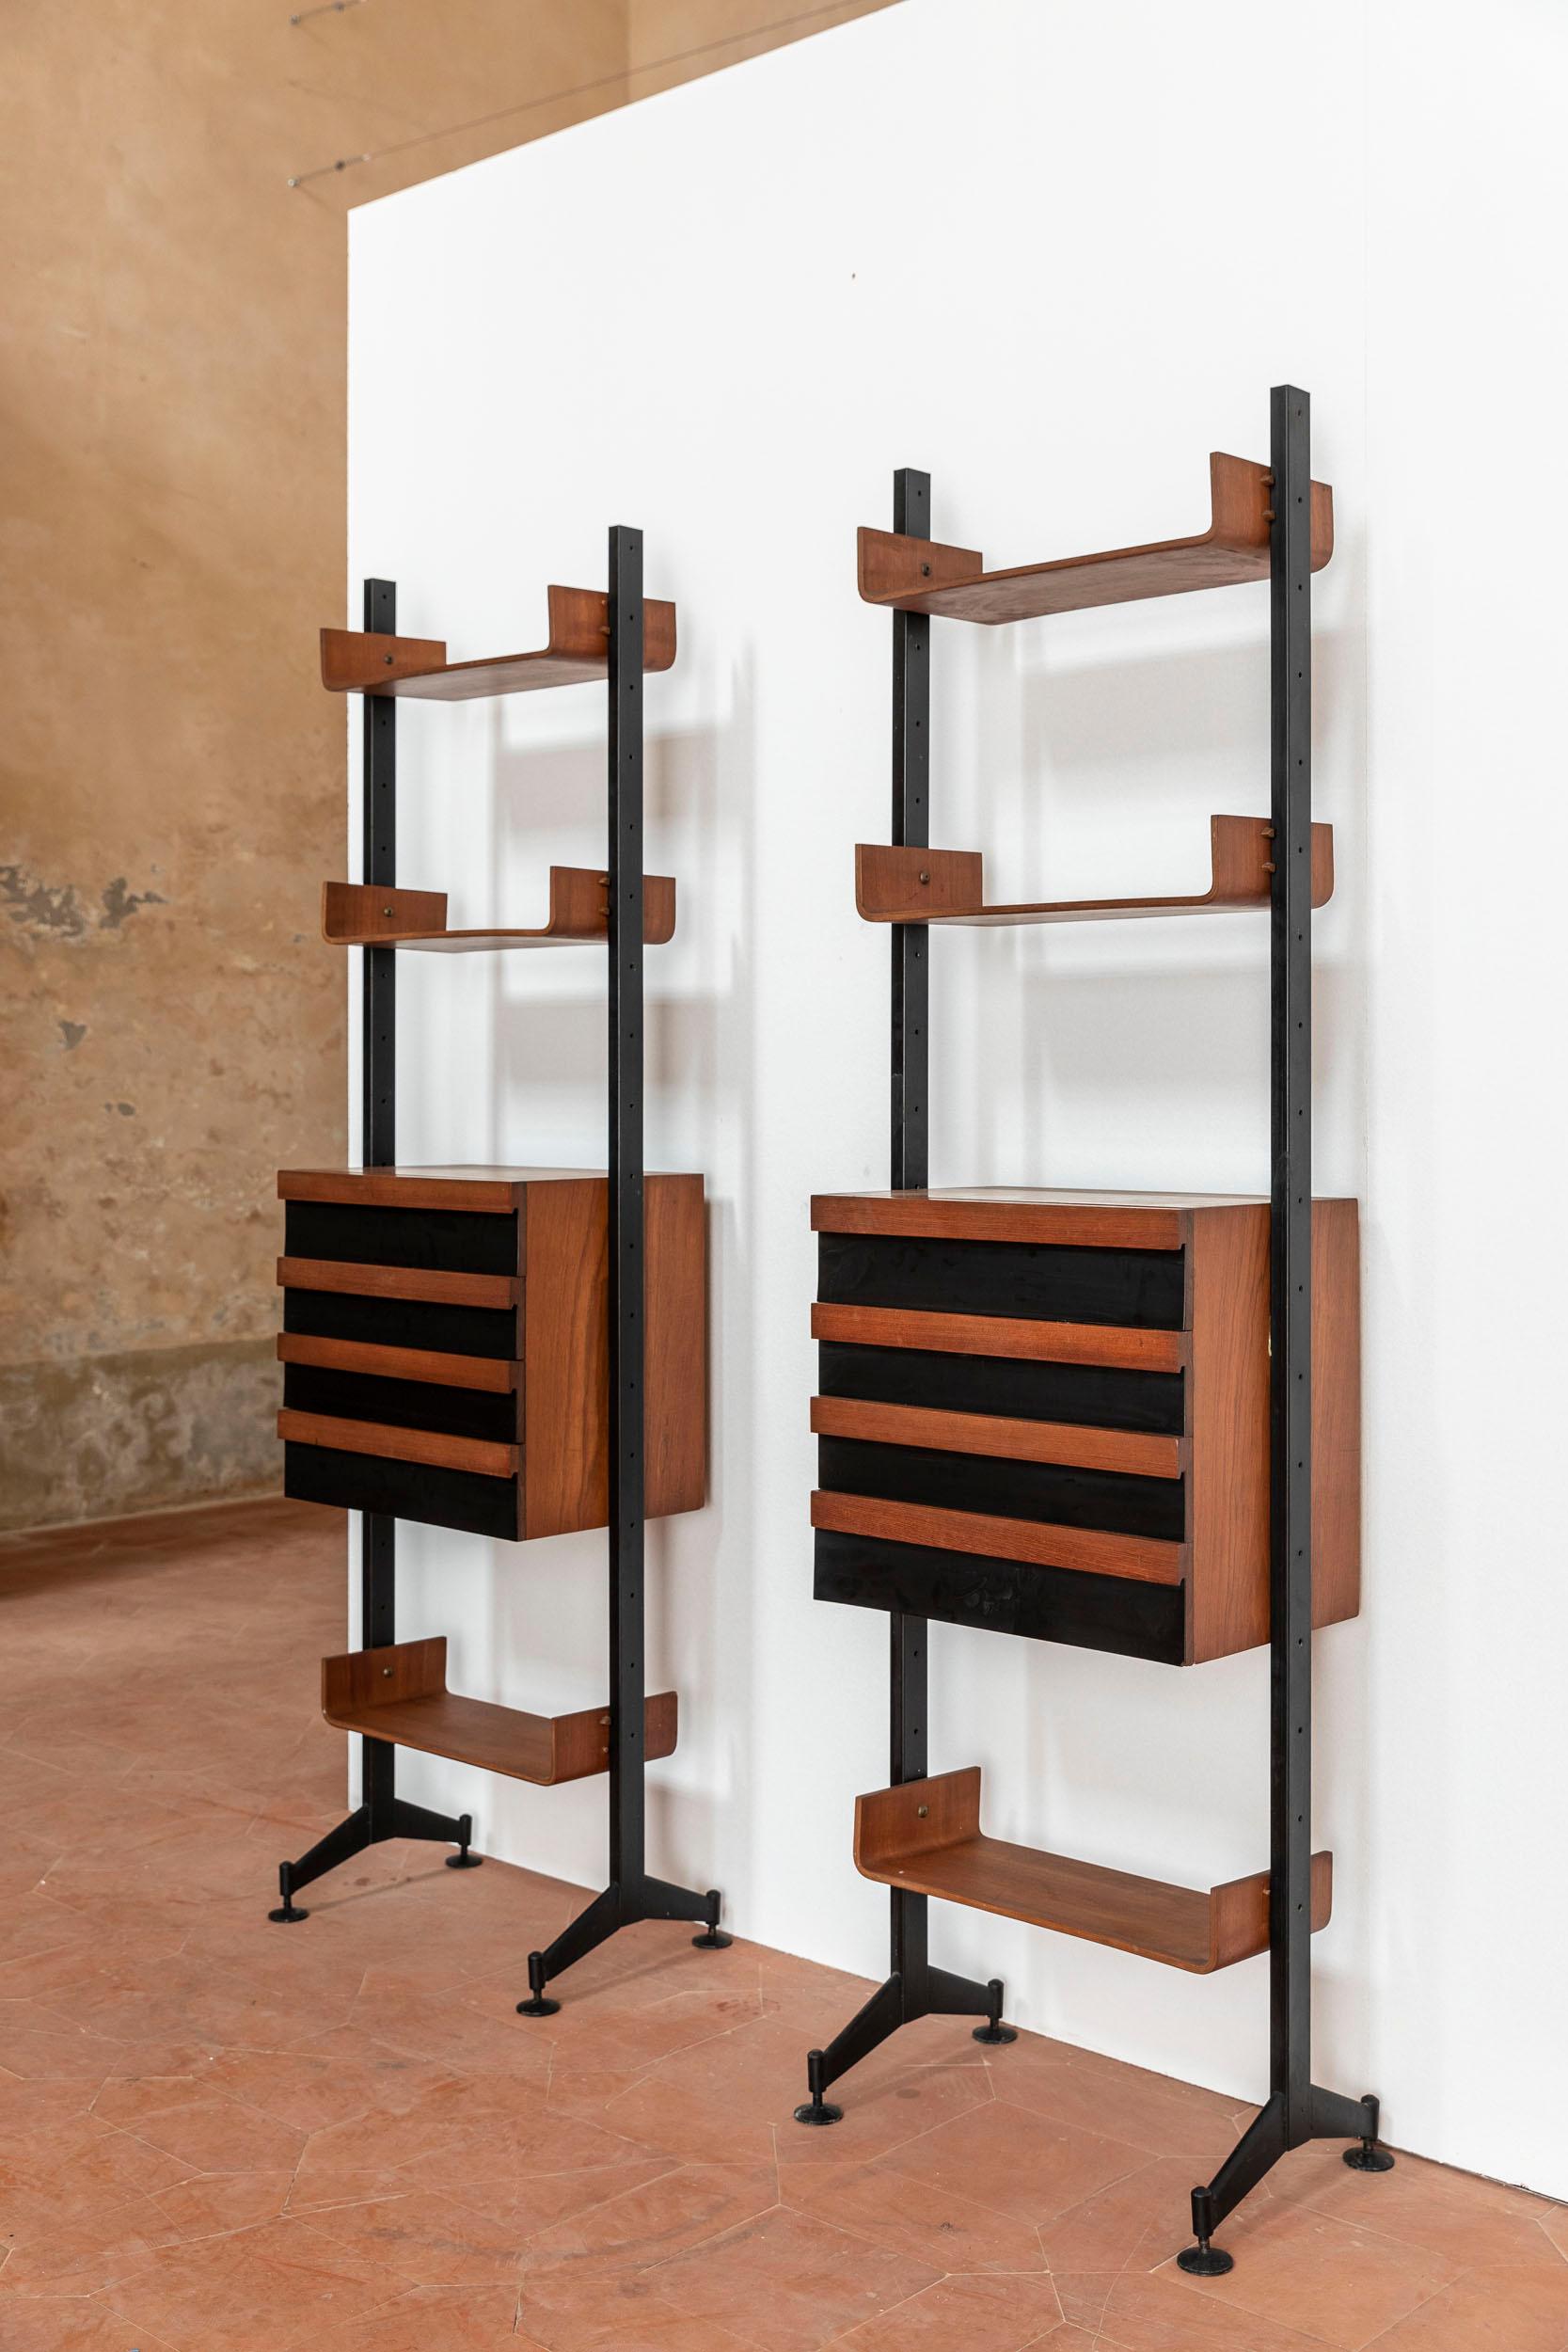 Pair of Franco Campo & Carlo Graffi bookshelves in black iron and rosewood. The bookshelf has a storage area with four drawers and three shelves made of curved rosewood veneer brown and black, all are attached to a black iron frame. 

Original